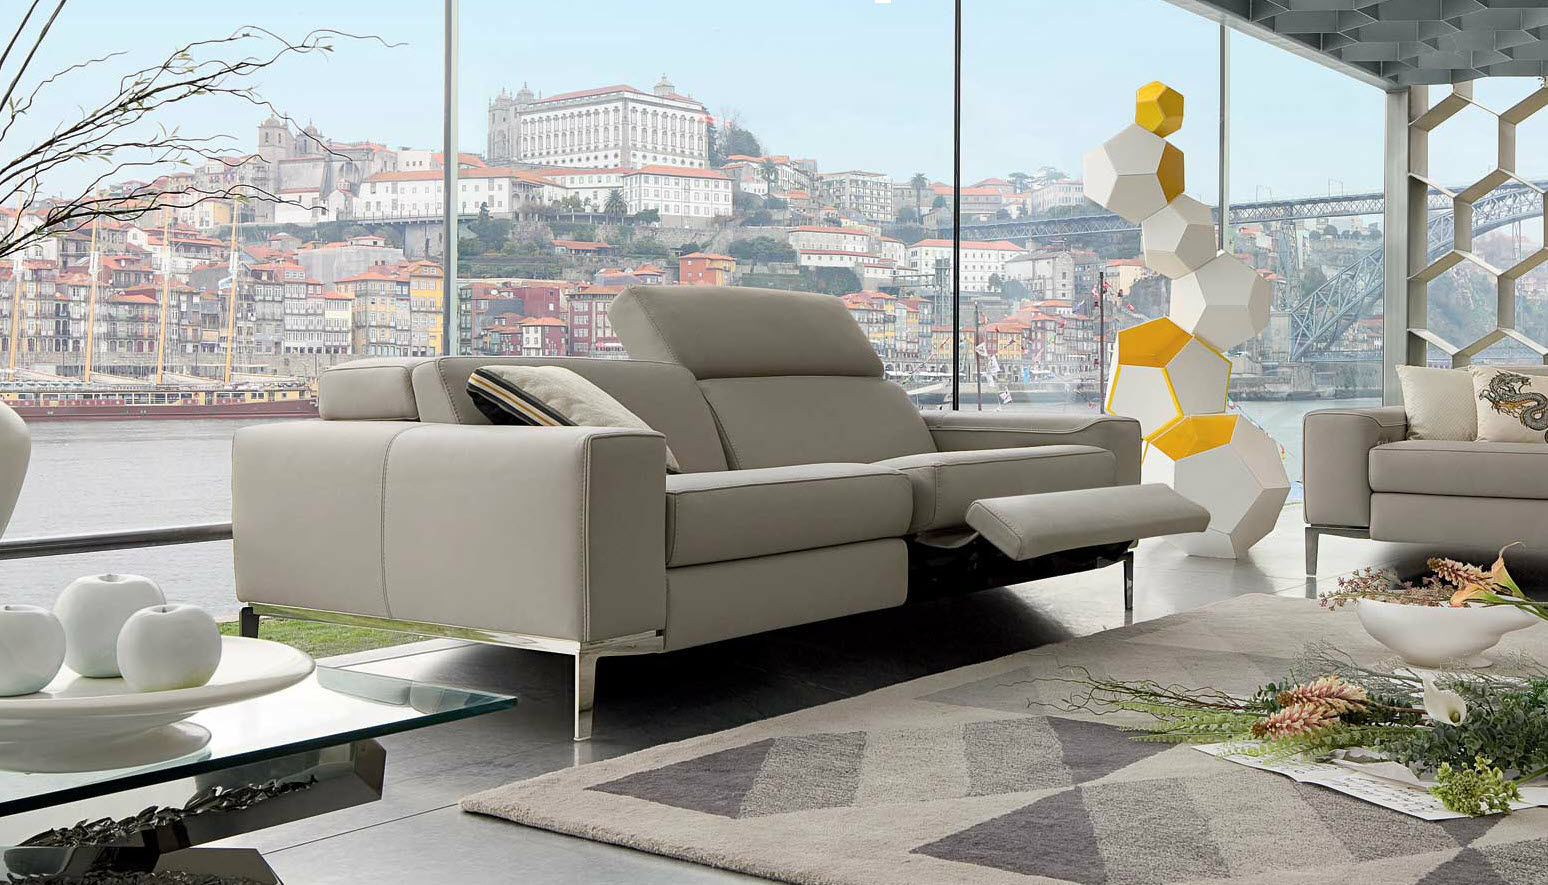 Contemporary Reclining With Wonderful Contemporary Reclining Sofa Furniture With Grey Color Design And Glass Wall Decoration Ideas For Inspiration  16 Small Living Room With Reclining Sofas To Fit Your Home Decor